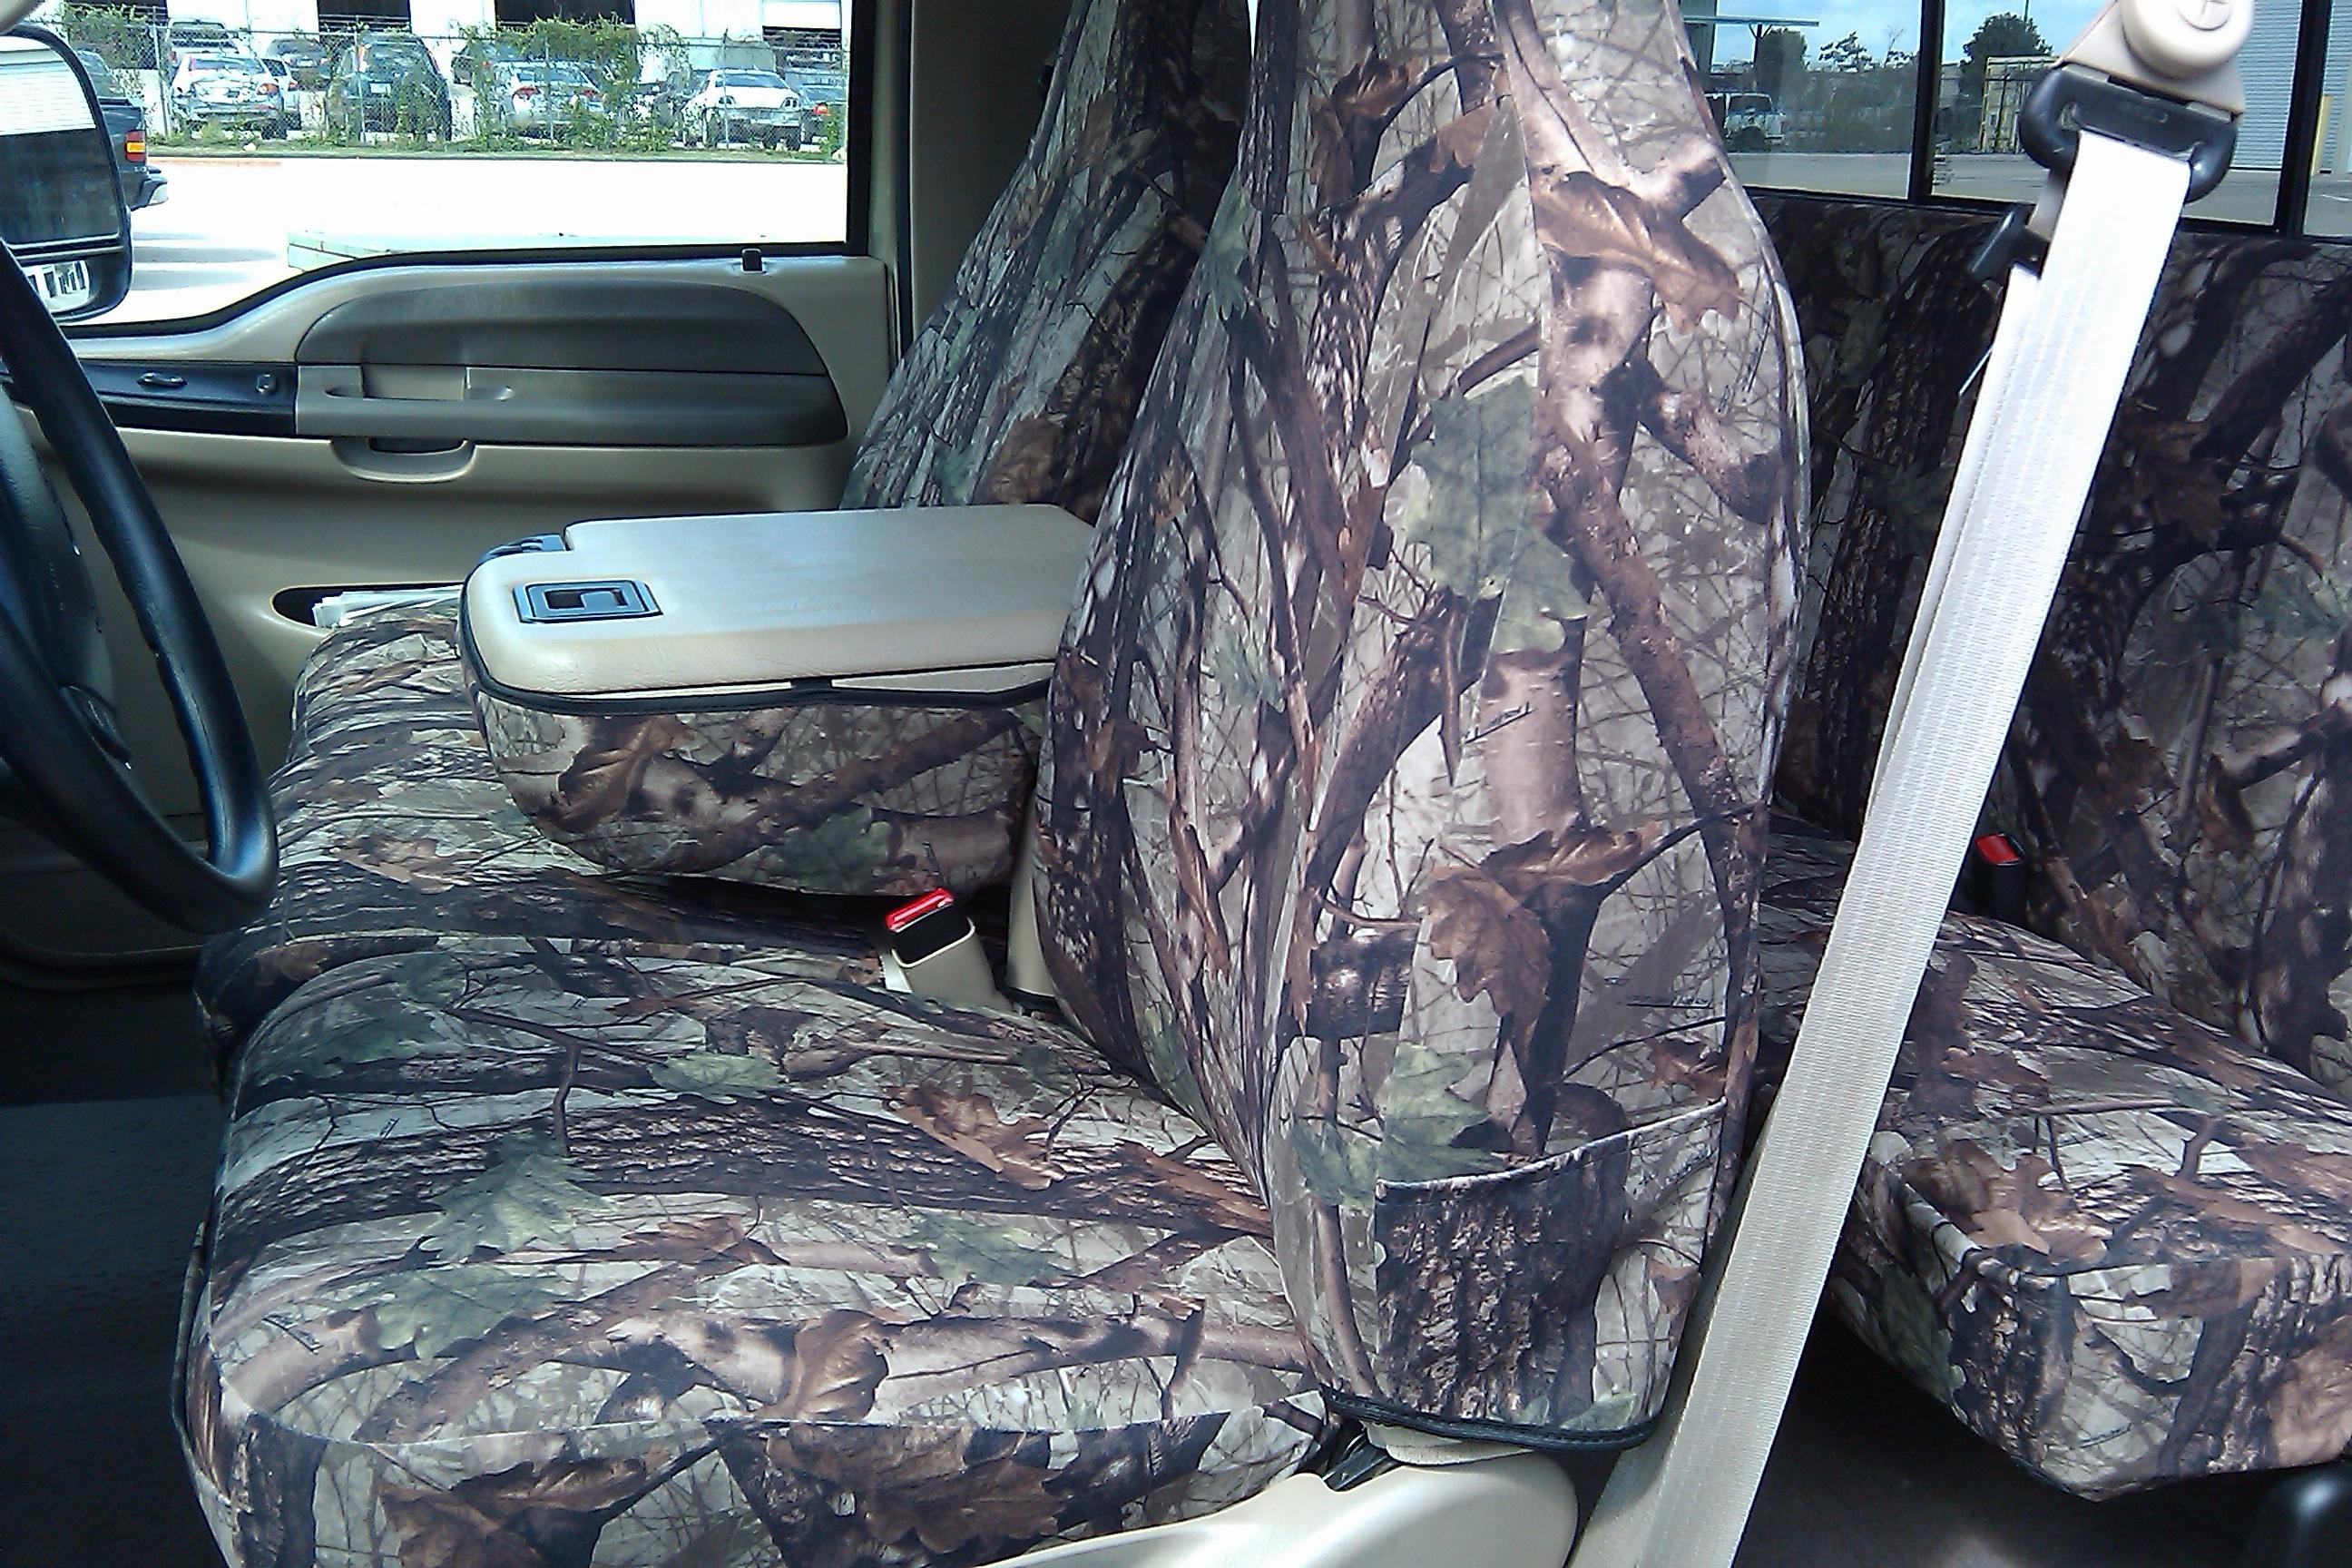 1999 2000 Ford F250 F350 F450 F550 XLT Front Driver Bottom Cloth Seat Cover Tan